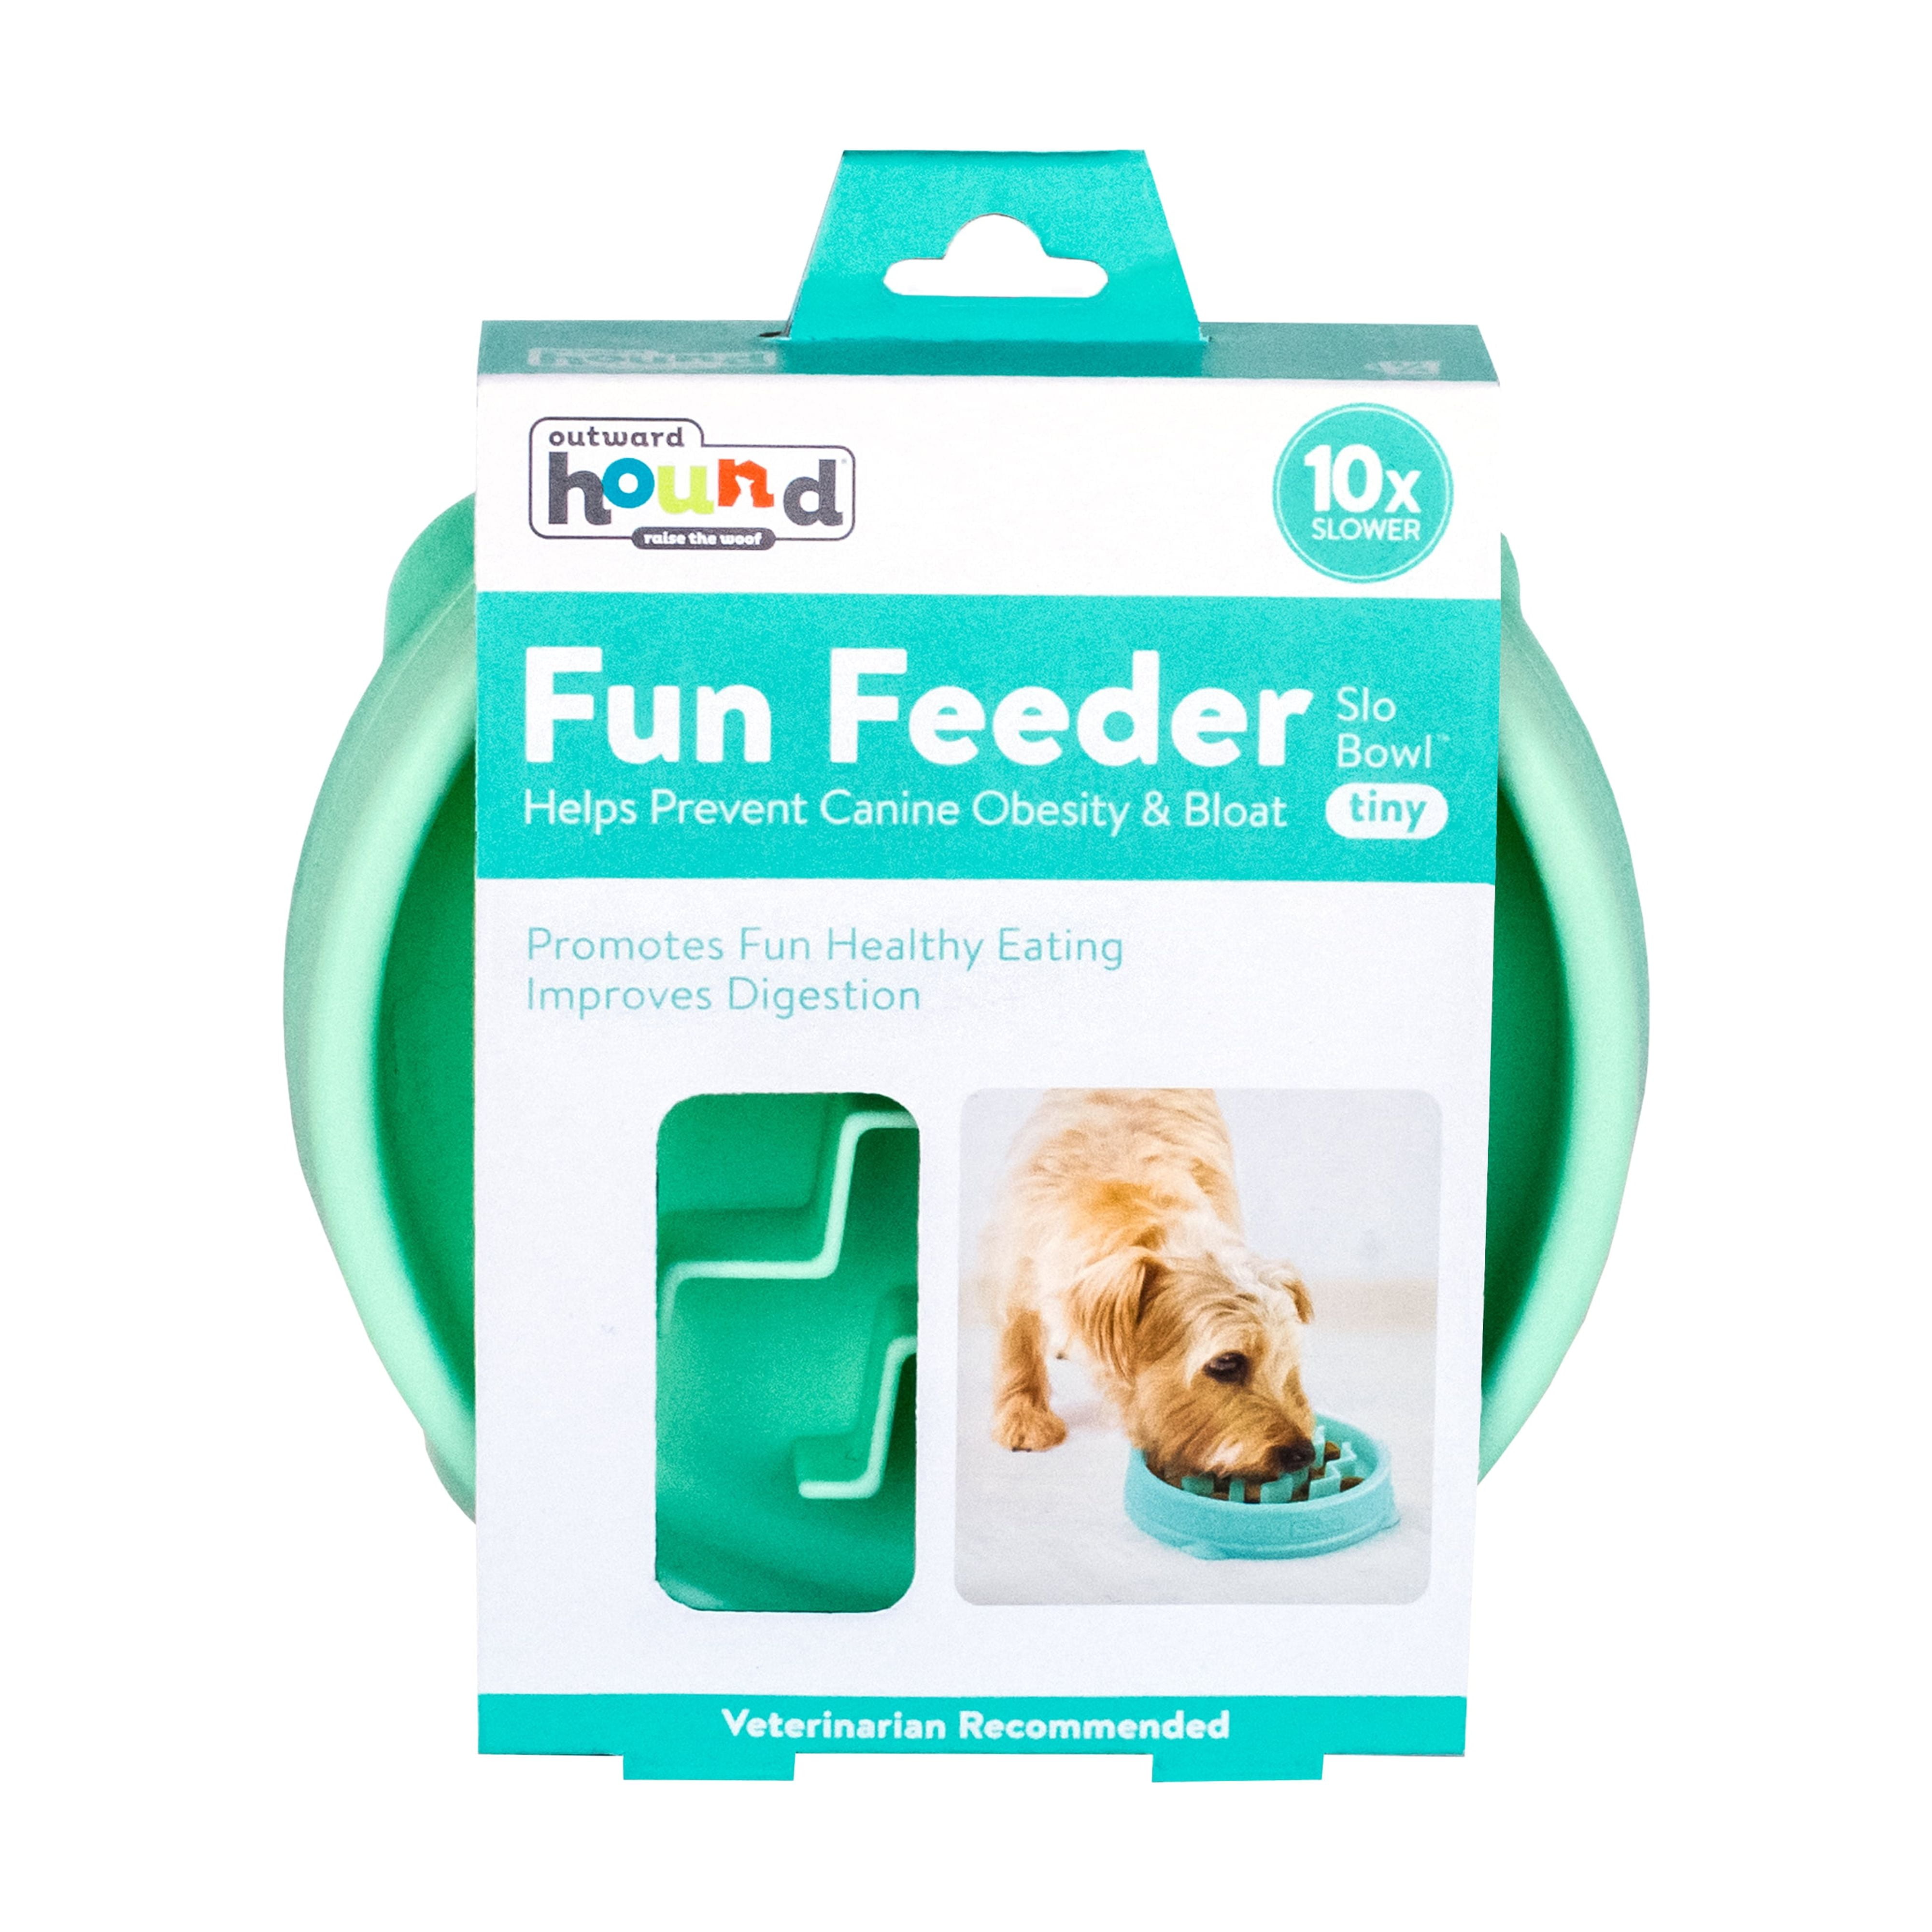 Only Natural Pet Sunup Eco-Friendly Slow-Feeder Dog Bowl, Teal / Small